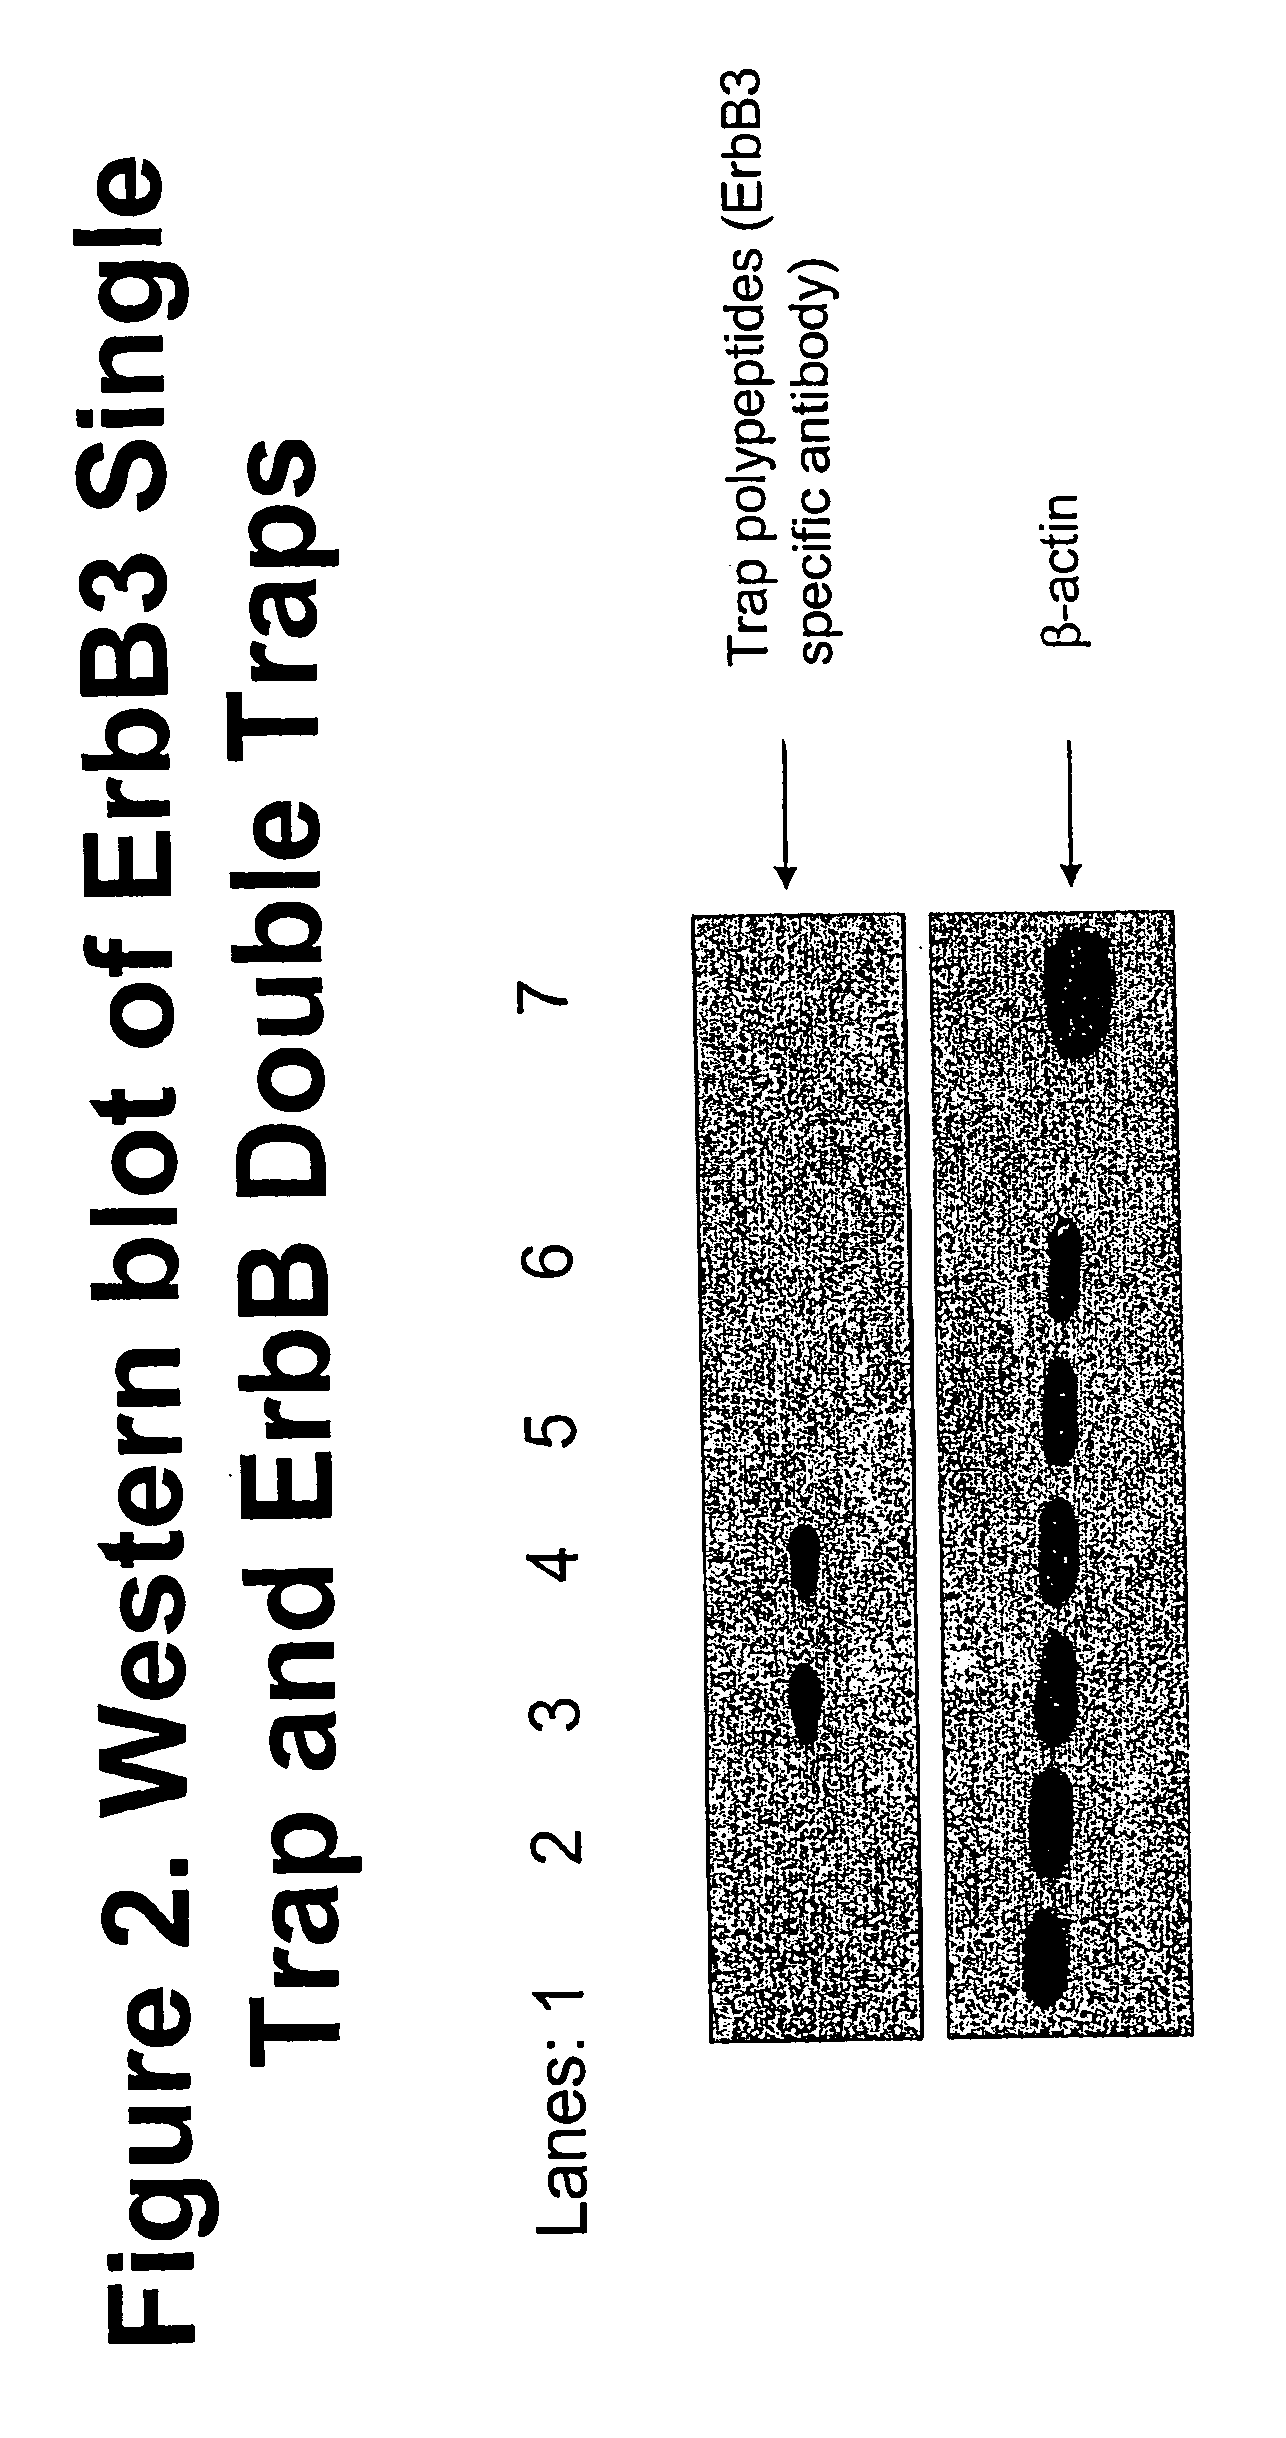 Tyrosine kinase inhibitor compositions and methods for manufacturing and using them in the treatment of disease